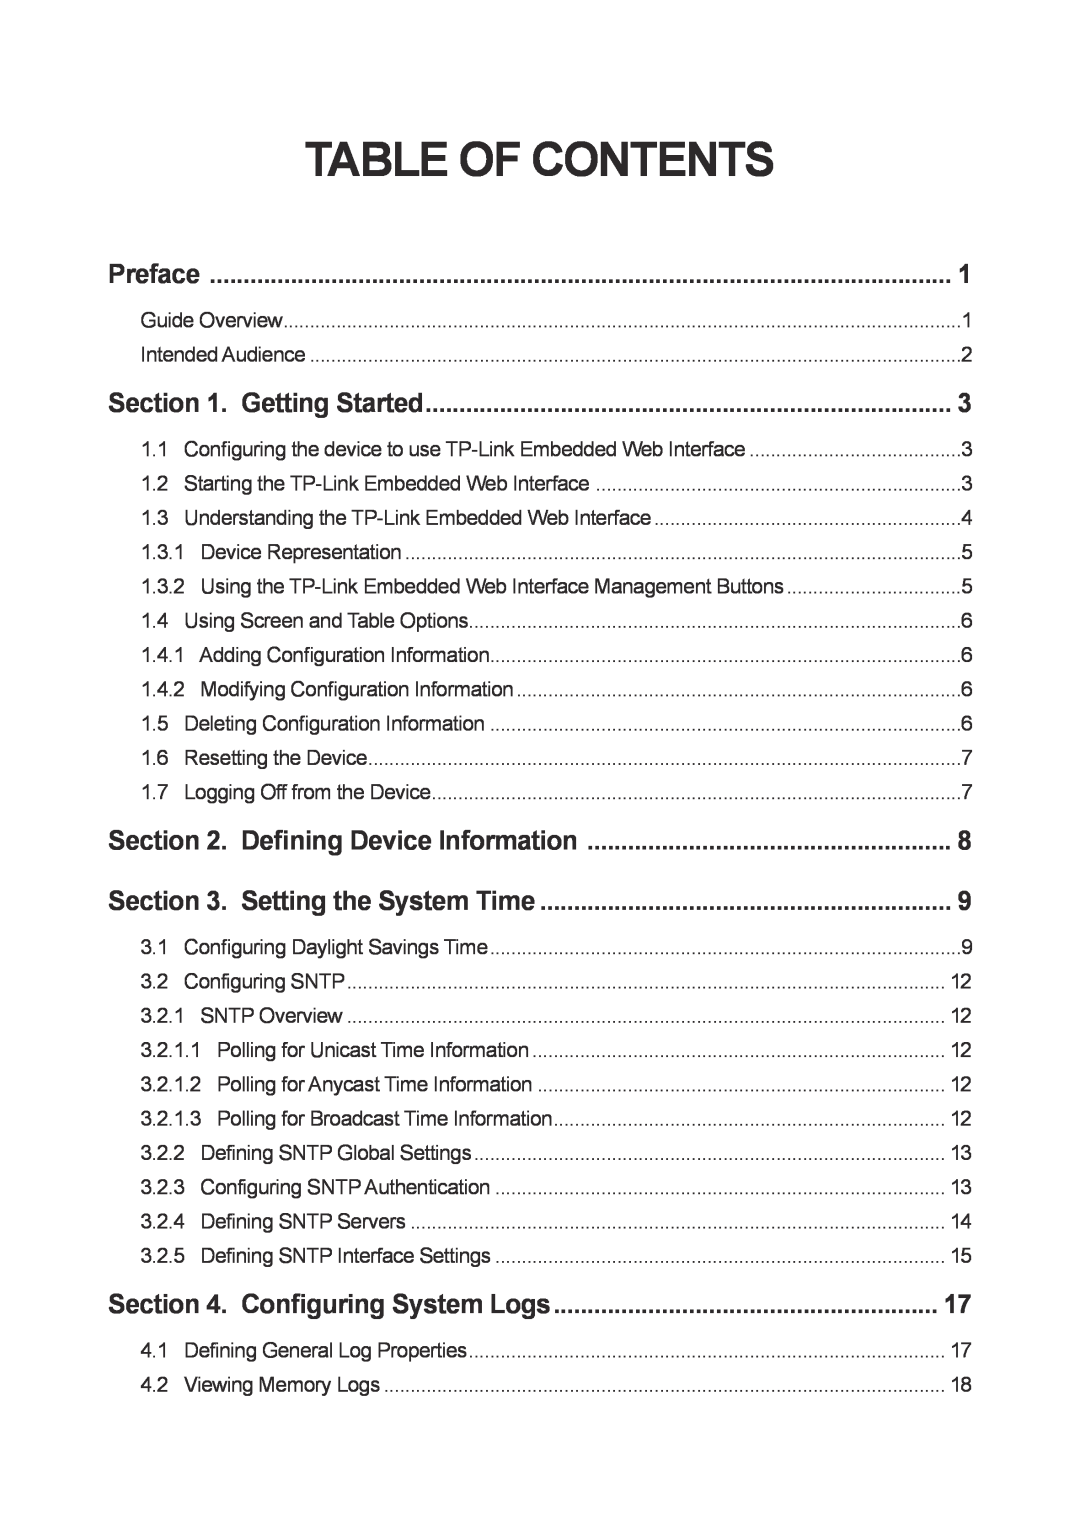 TP-Link TL-SL3452 manual Table Of Contents, Defining Device Information, Setting the System Time, Configuring System Logs 